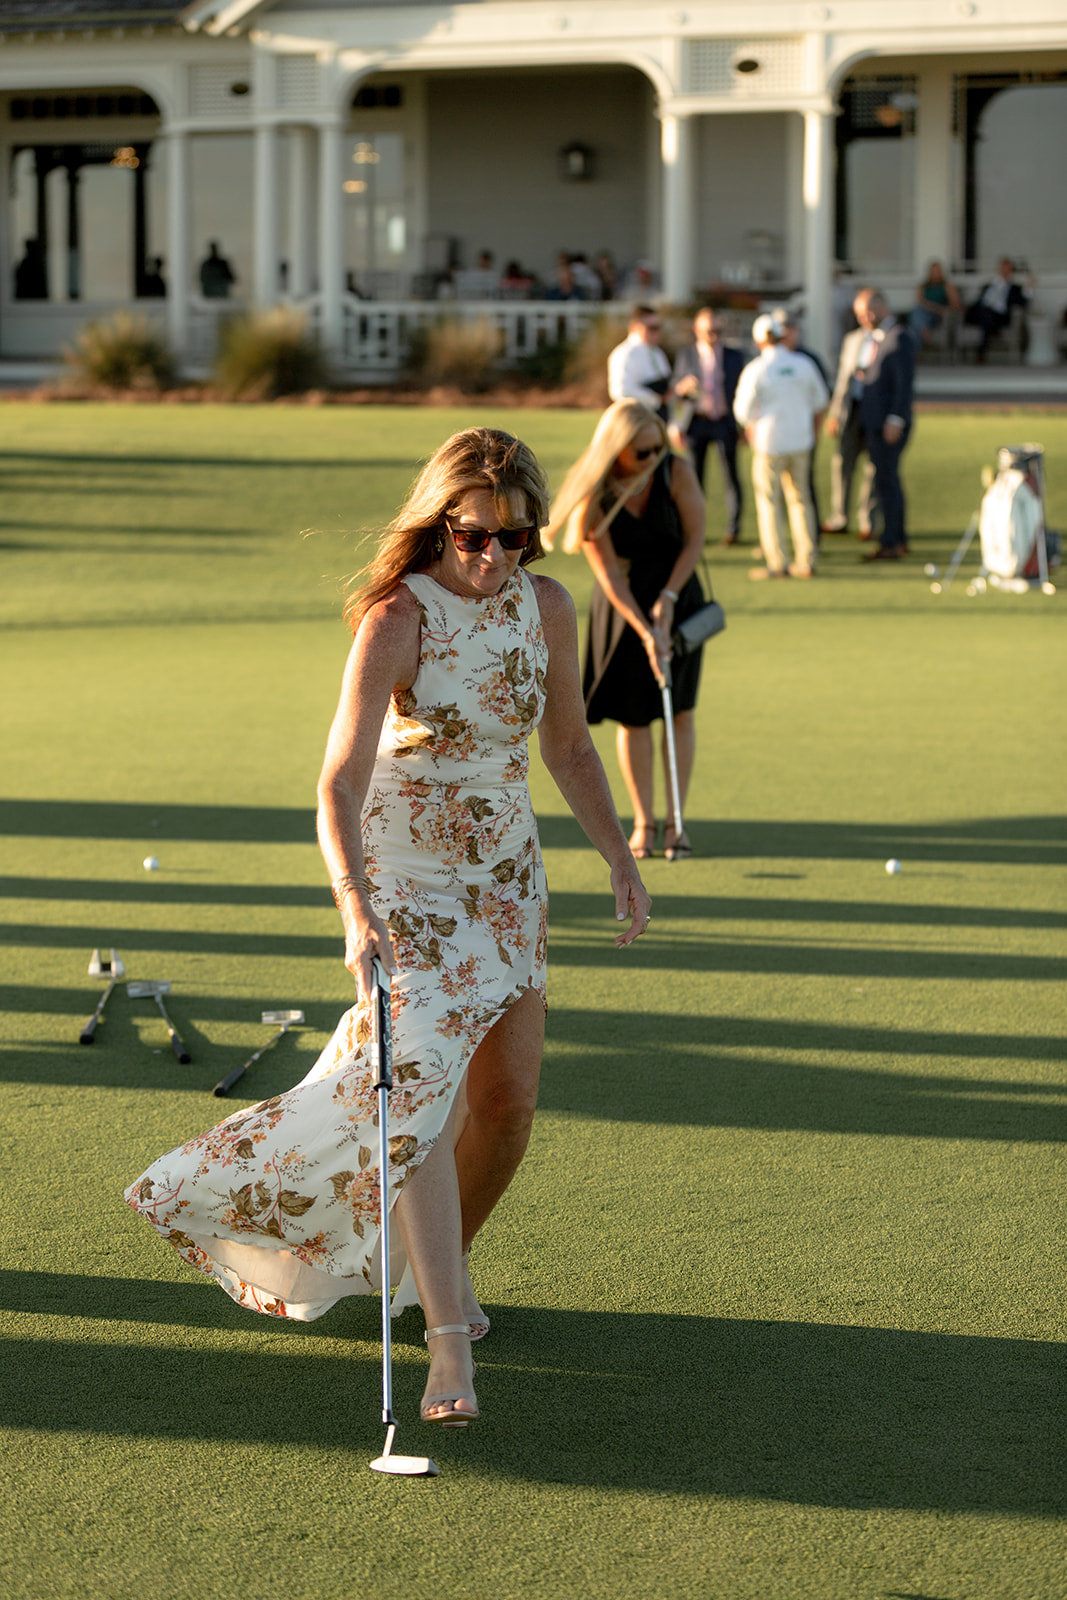 Wedding guest in flower dress participating in putting contest during cocktail hour at Kiawah Ocean Course wedding